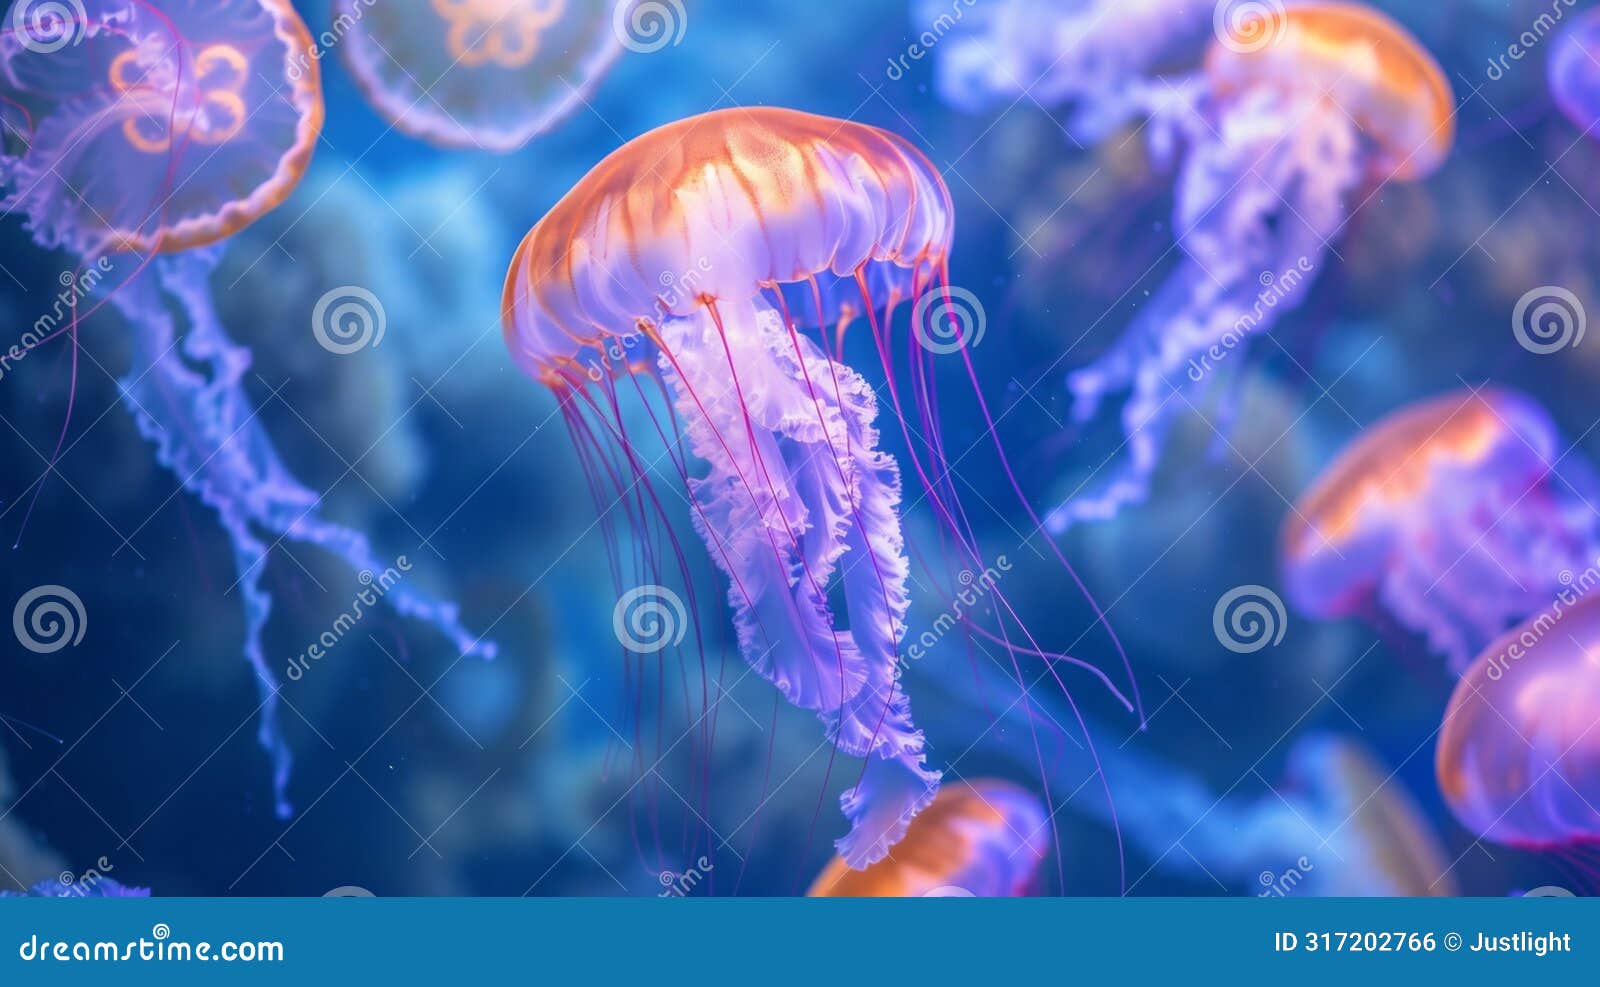 serene floaters with gentle pulsing movements jellyfish drift and soar with tranquil beauty creating a serene atmosphere